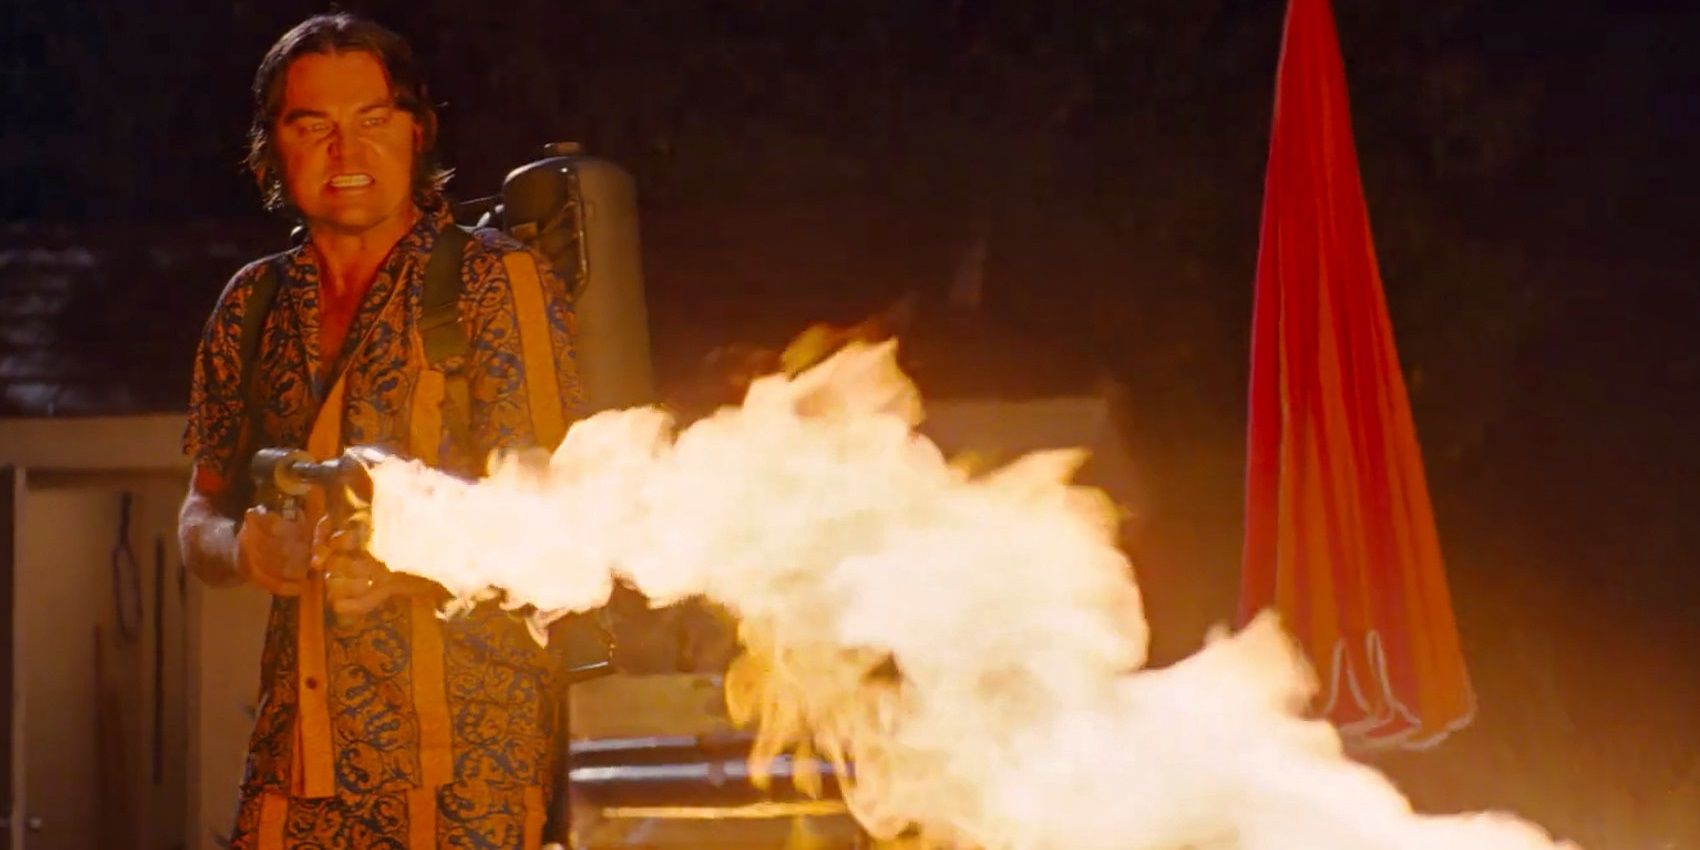 Rick Dalton using a flamethrower in Once Upon a Time in Hollywood